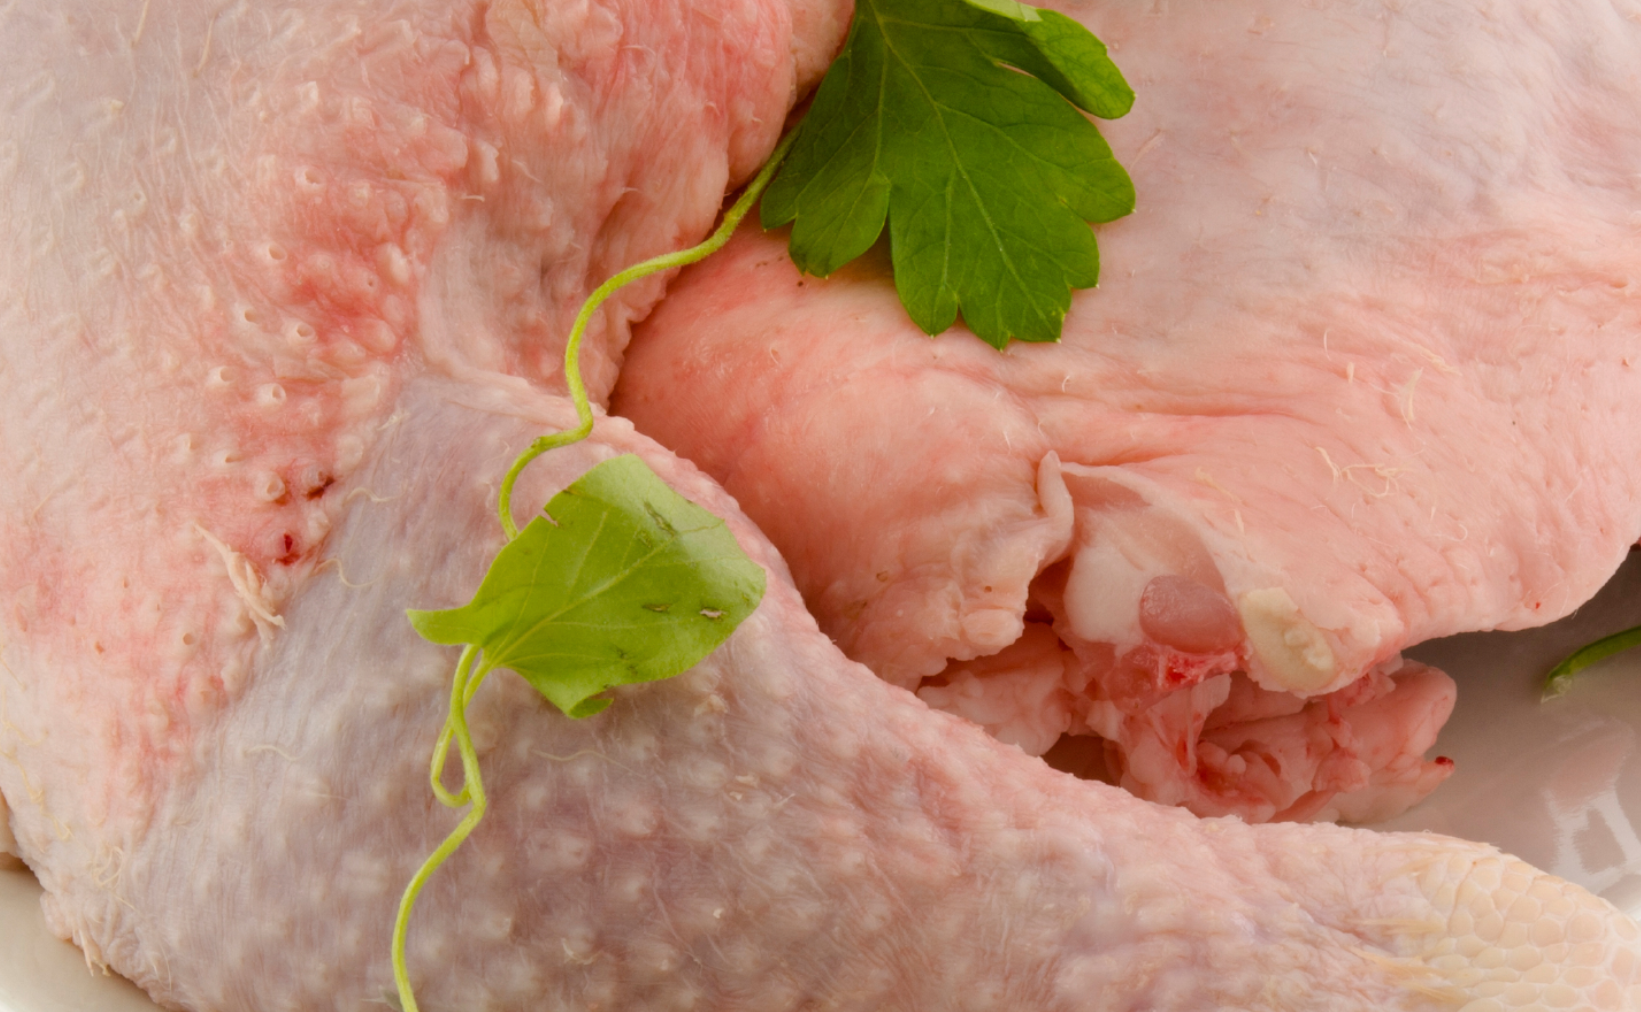 How To Handle Raw Chicken?